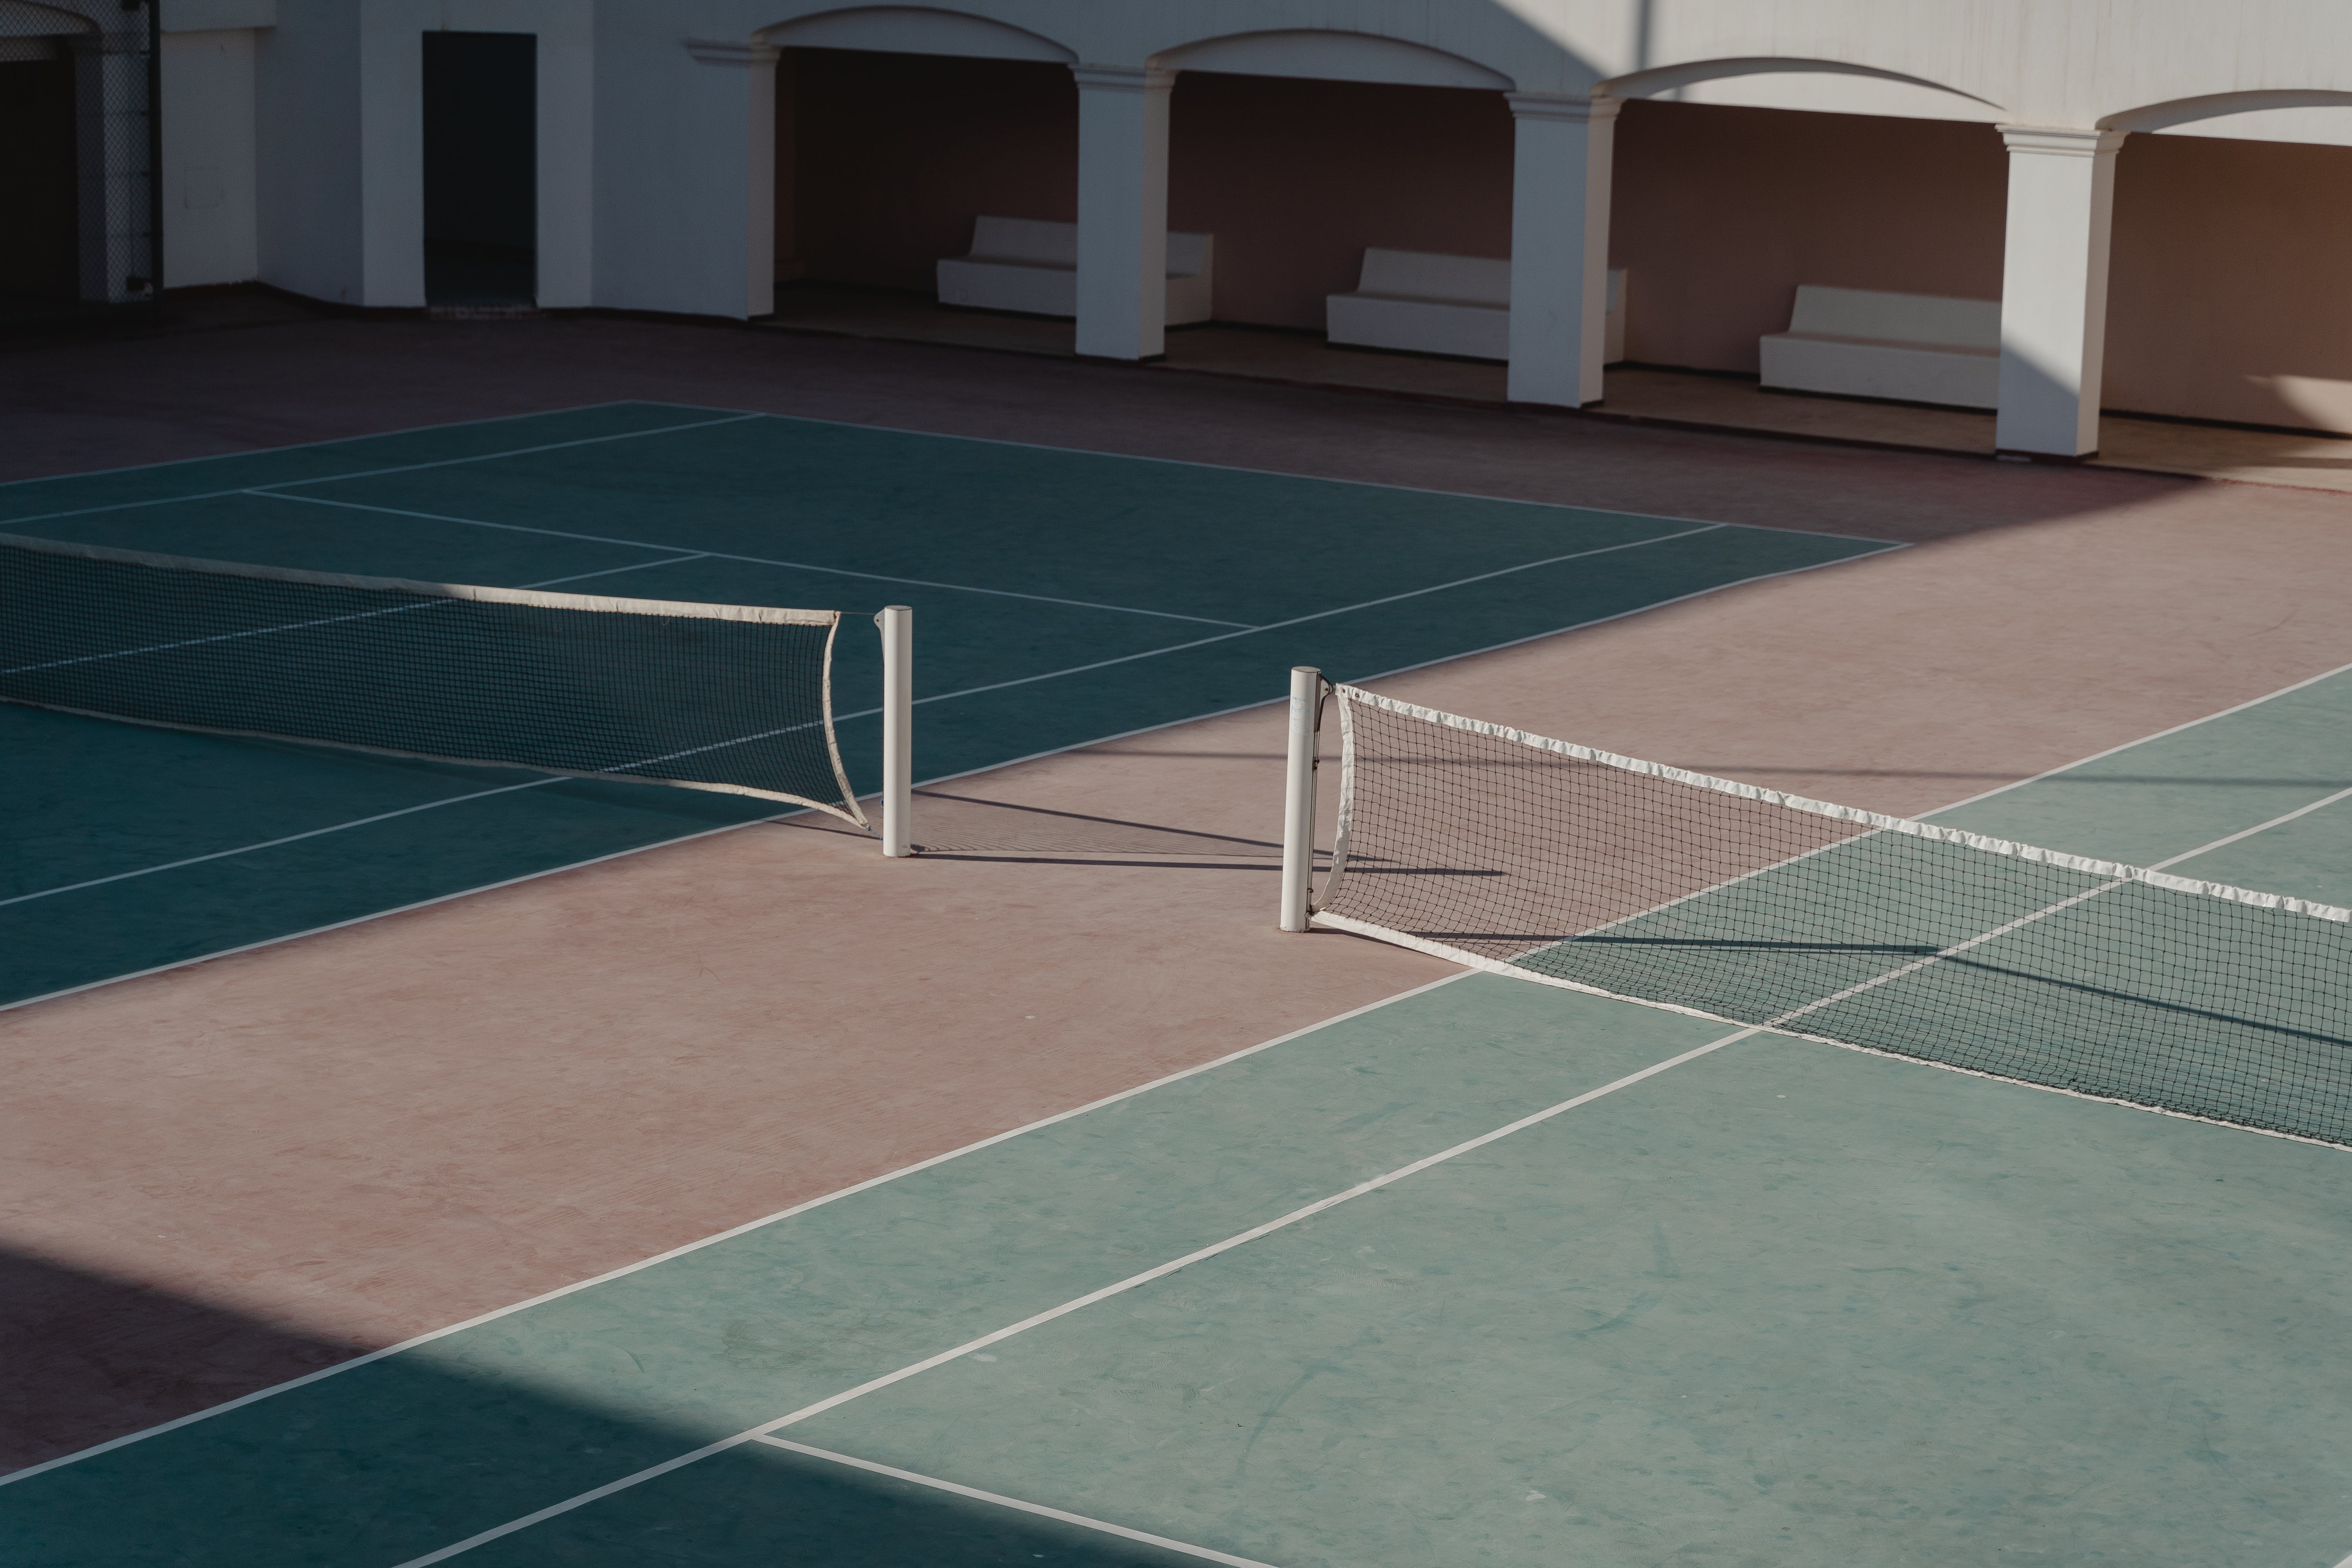 A tennis court with two tennis nets set up on it - Tennis